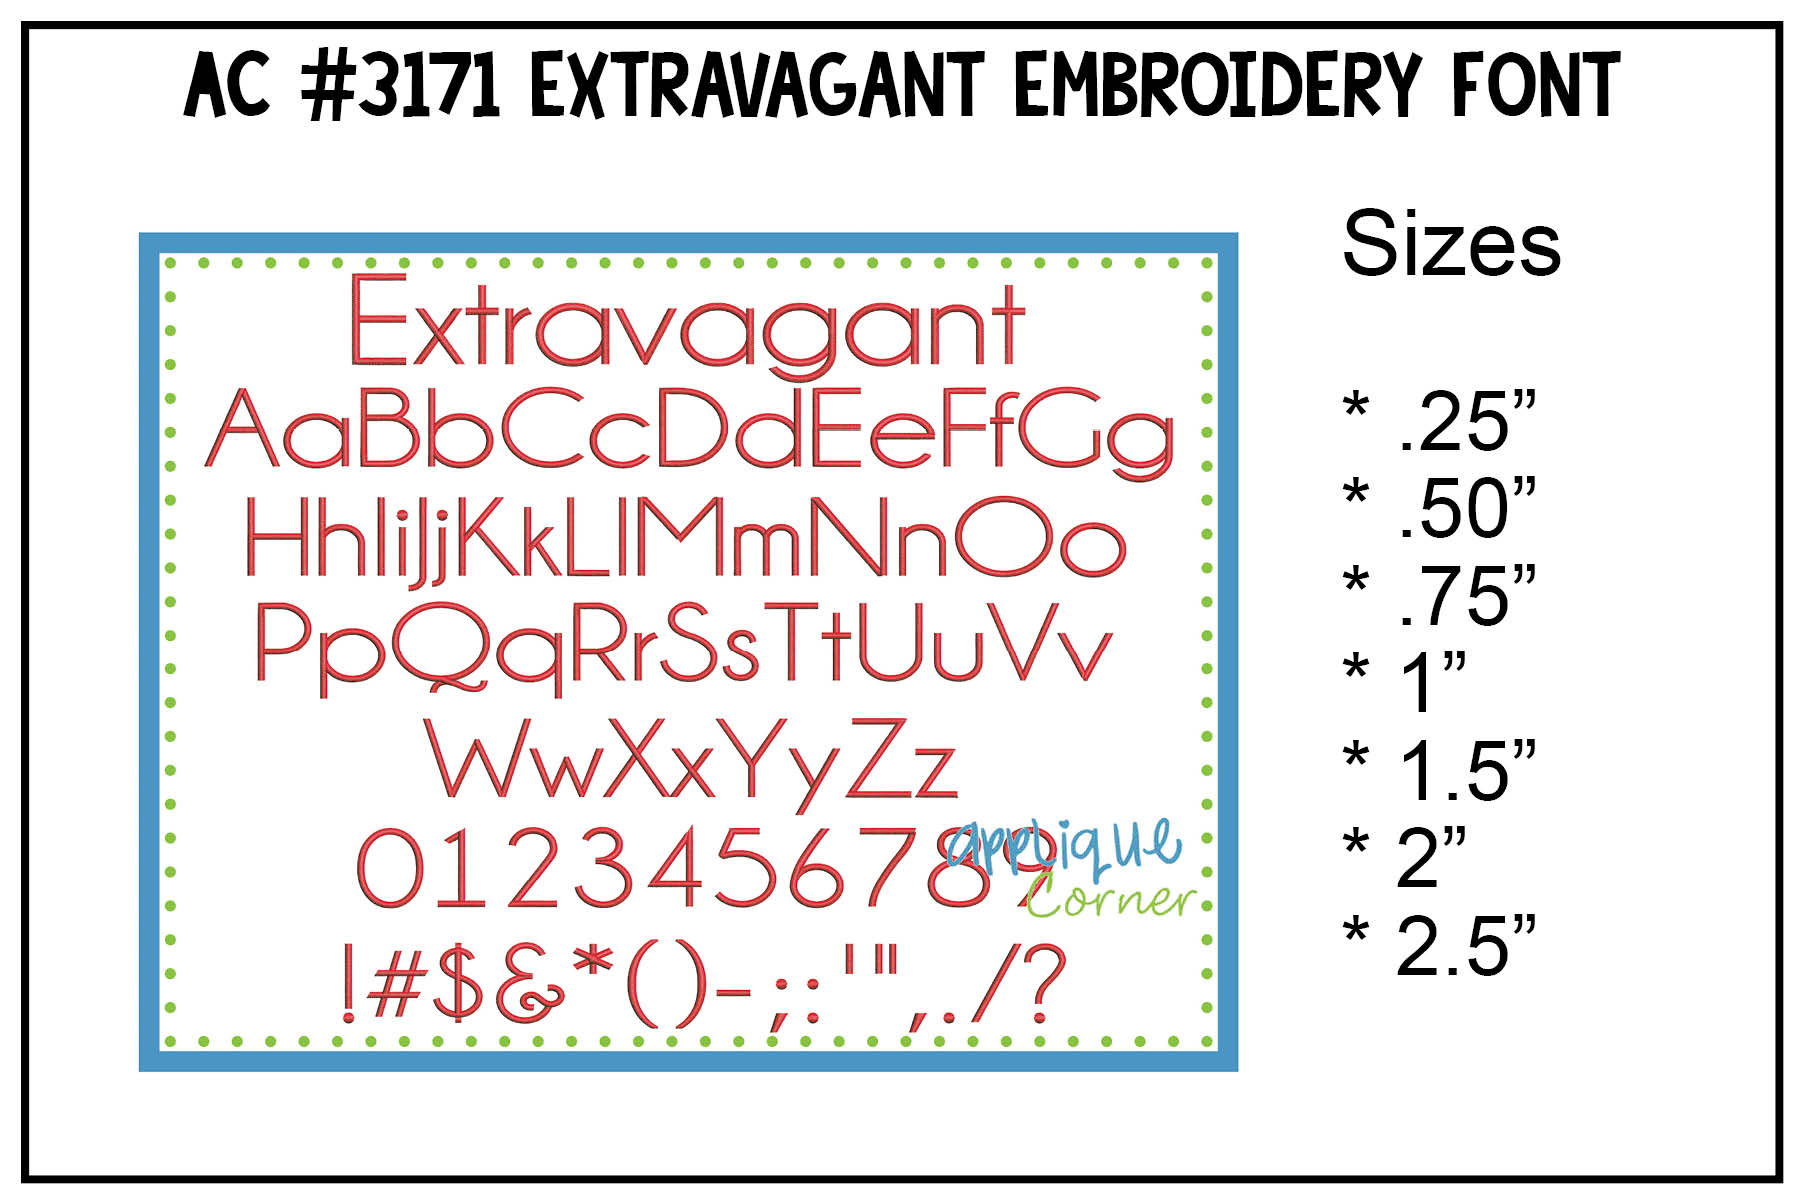 Extravagant Embroidery Font